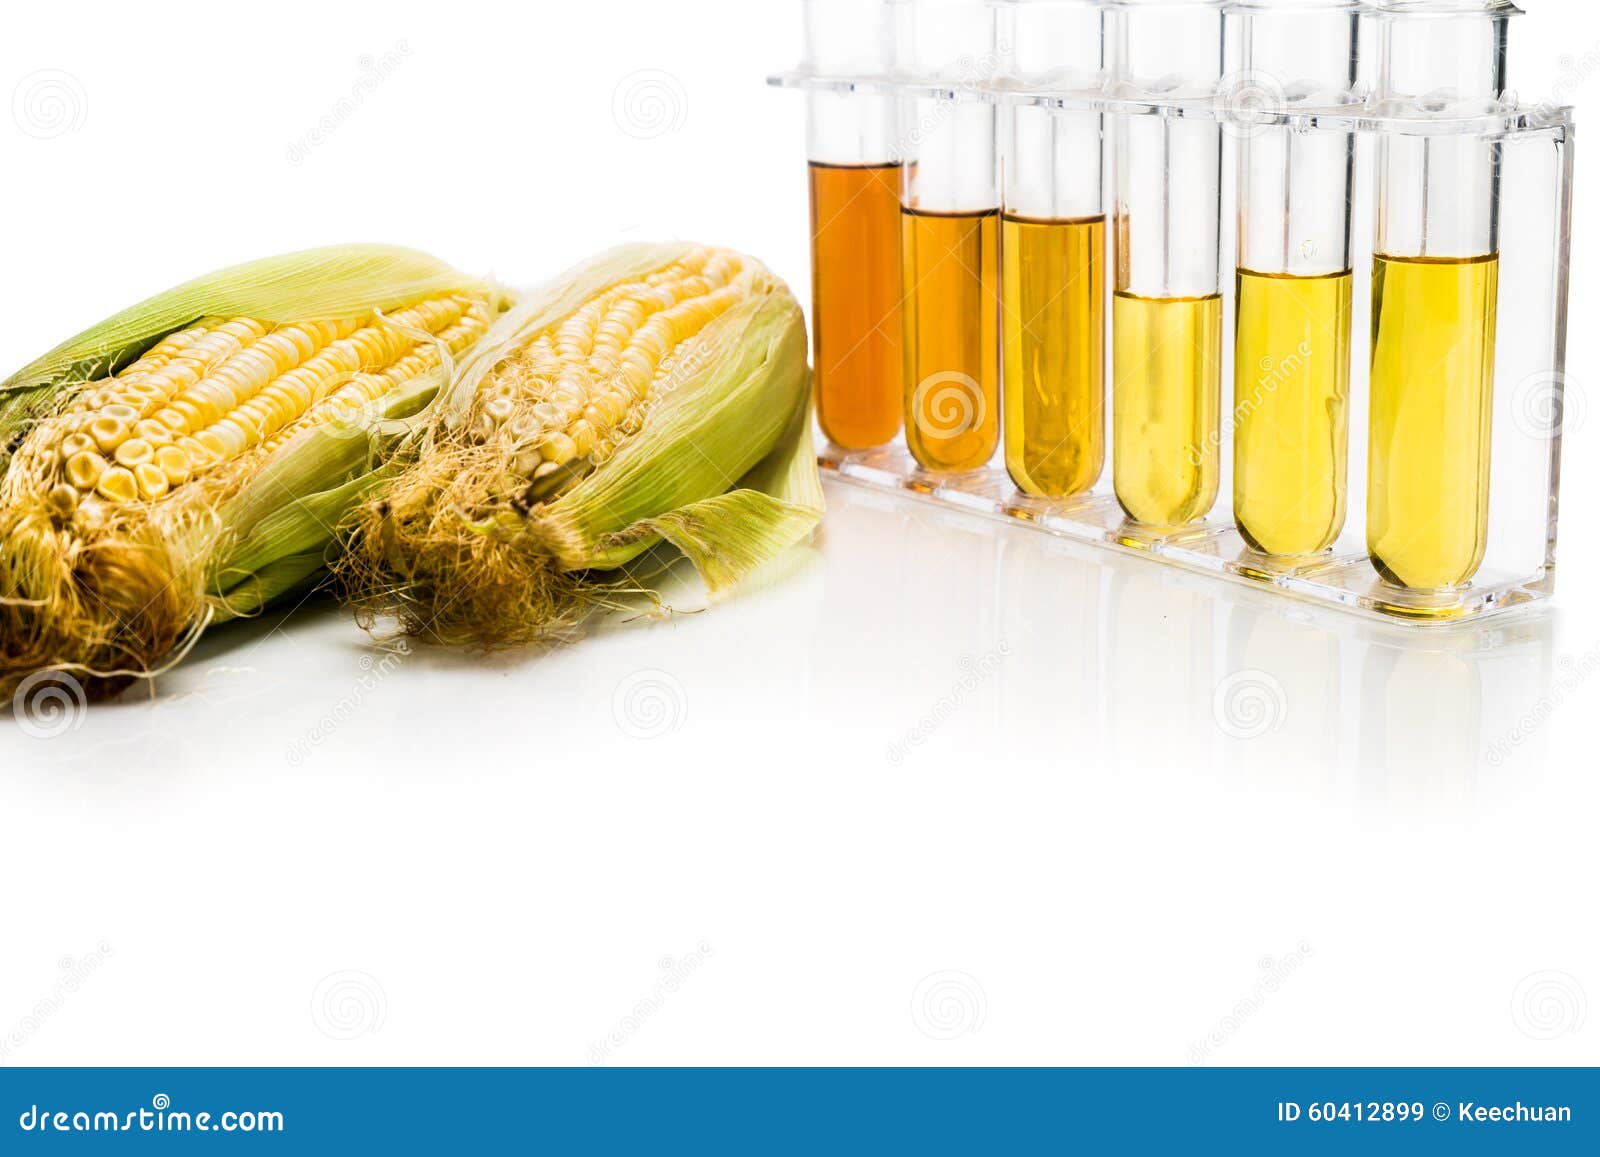 Corn Generated Ethanol Biofuel With Test Tubes On White ...